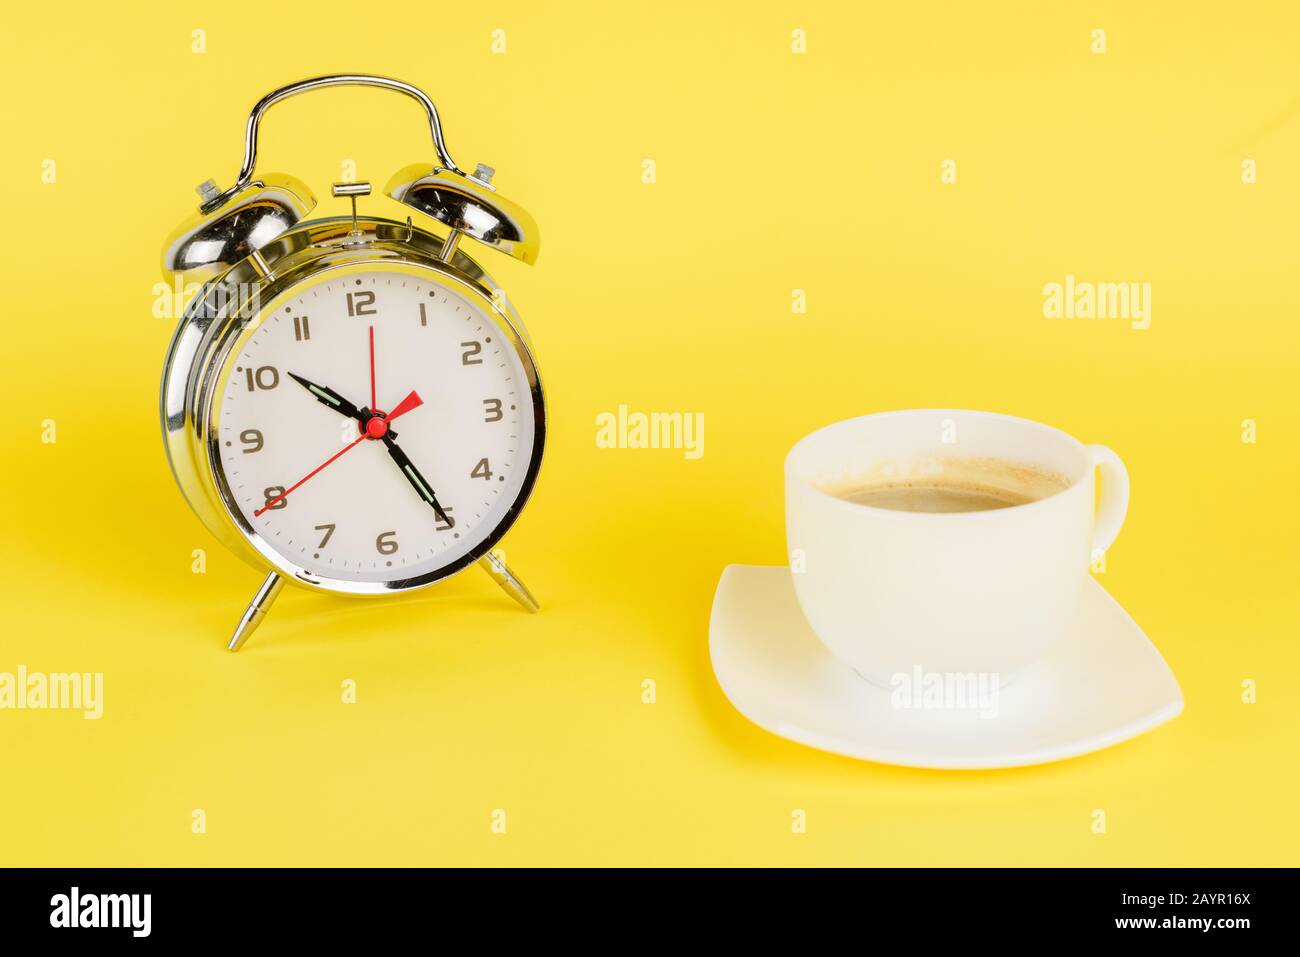 https://c8.alamy.com/comp/2AYR16X/silver-alarm-clock-and-cup-of-coffee-on-yellow-background-2AYR16X.jpg